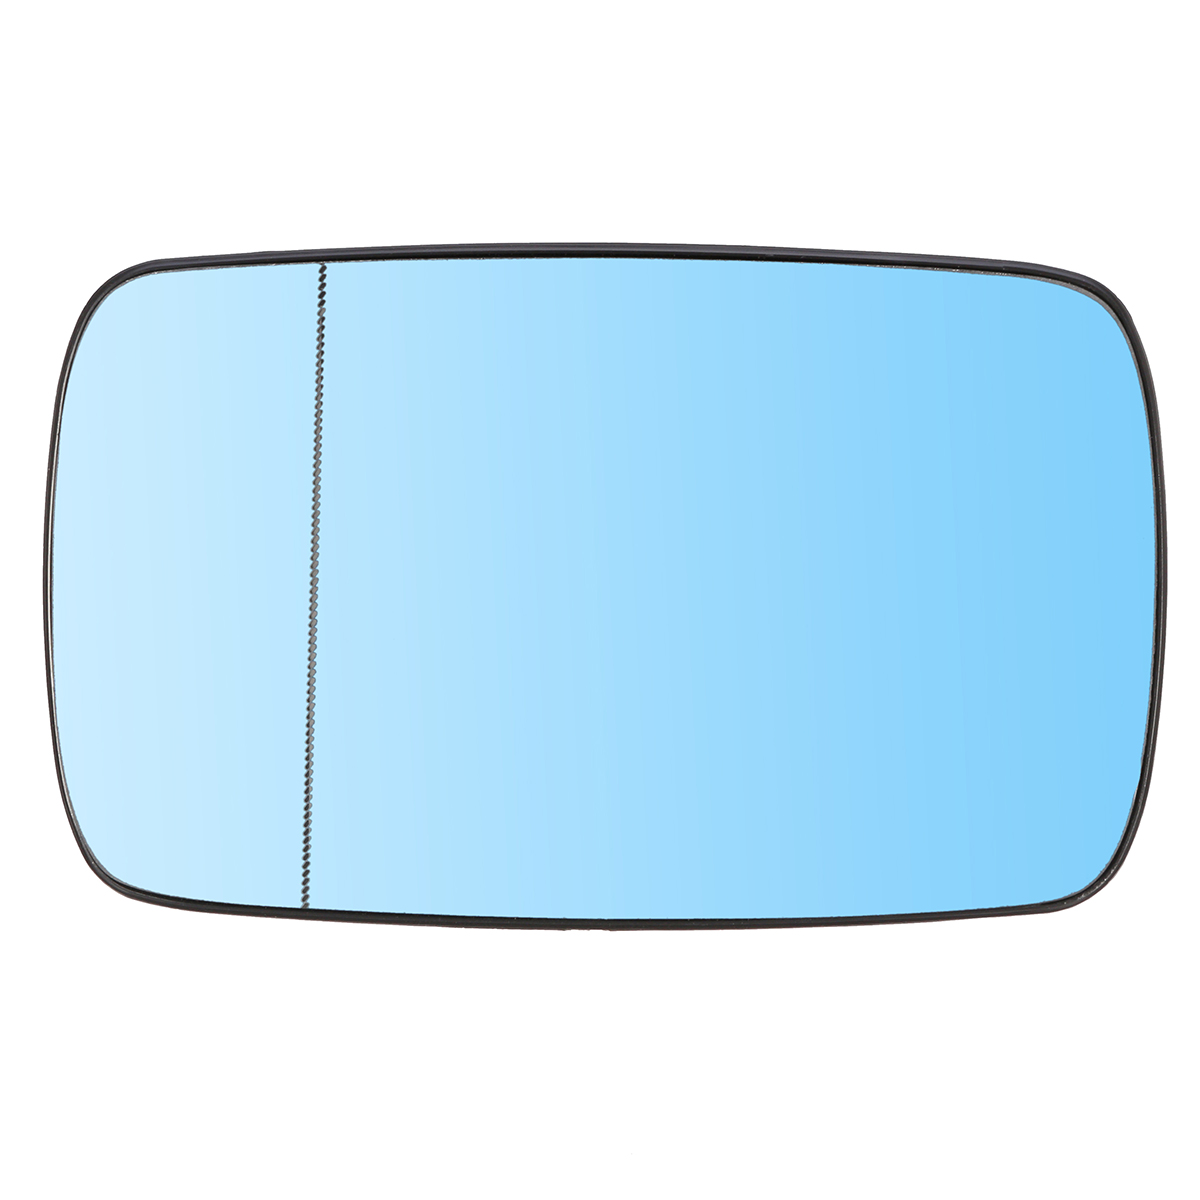 Car-Left-And-Right-Side-Heated-Blue-Wing-Mirror-Glass-For-BMW-E39-E46-1998ndash2005-1170221